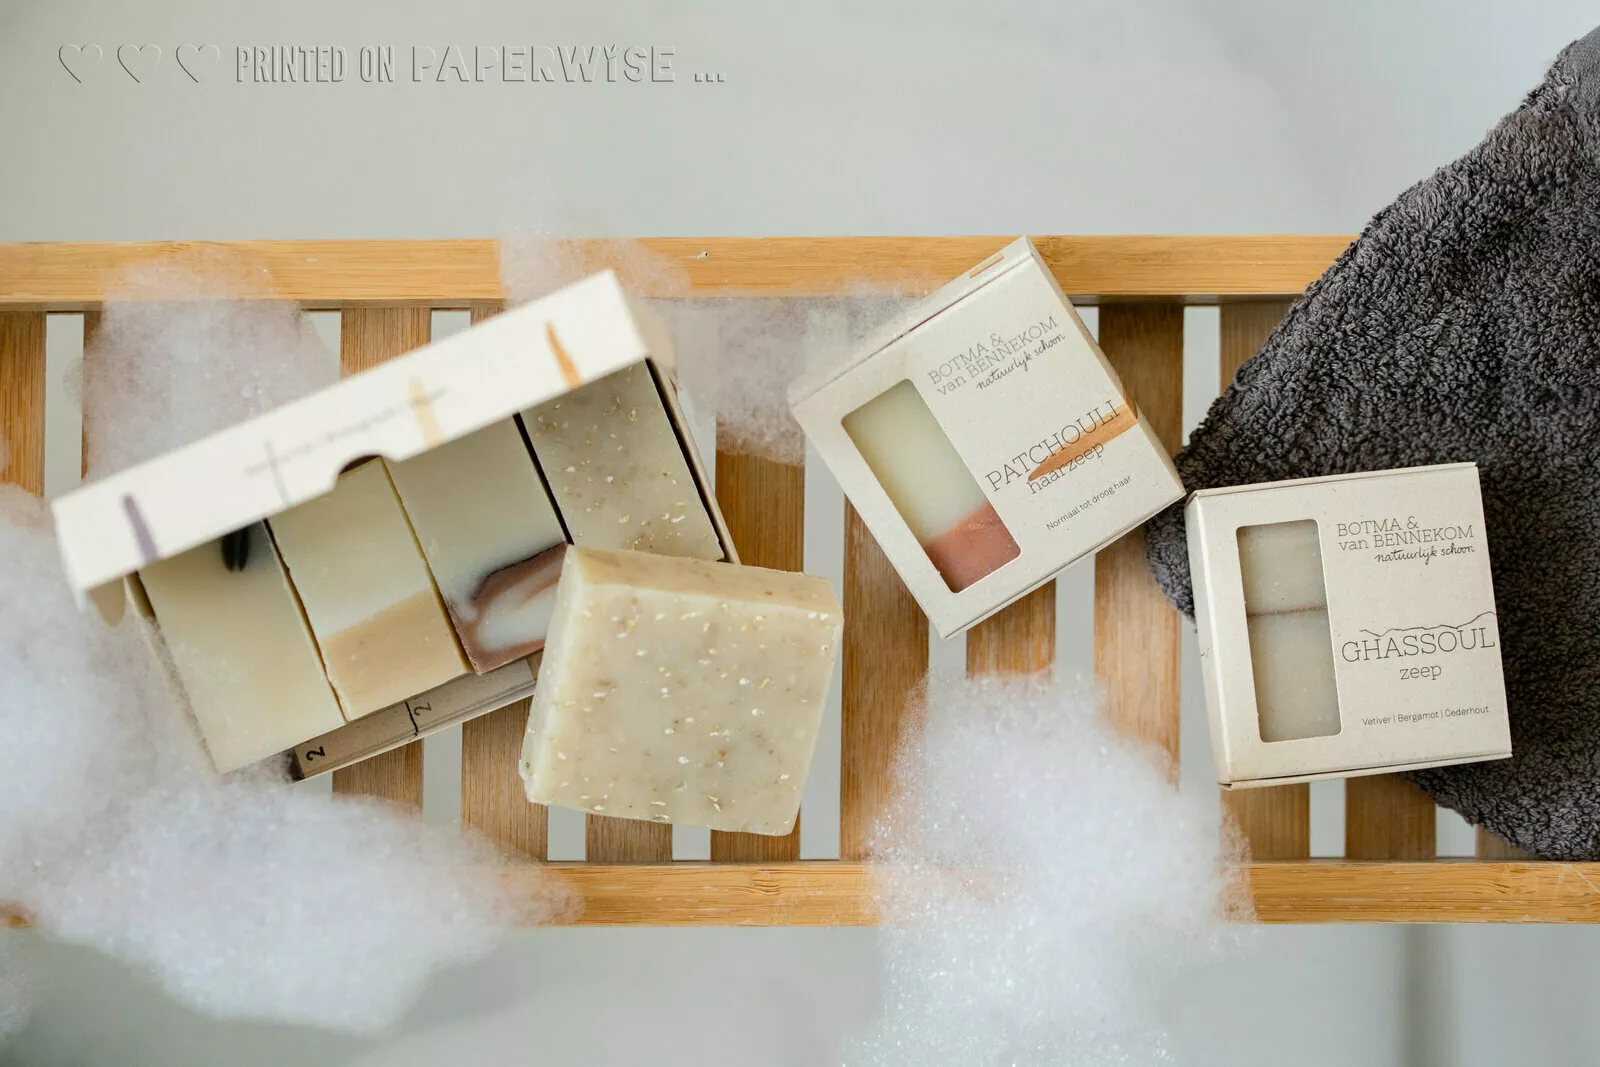 PaperWise eco friendly paper sustainablesoap bar box packaging BotmaenvanBennekom5